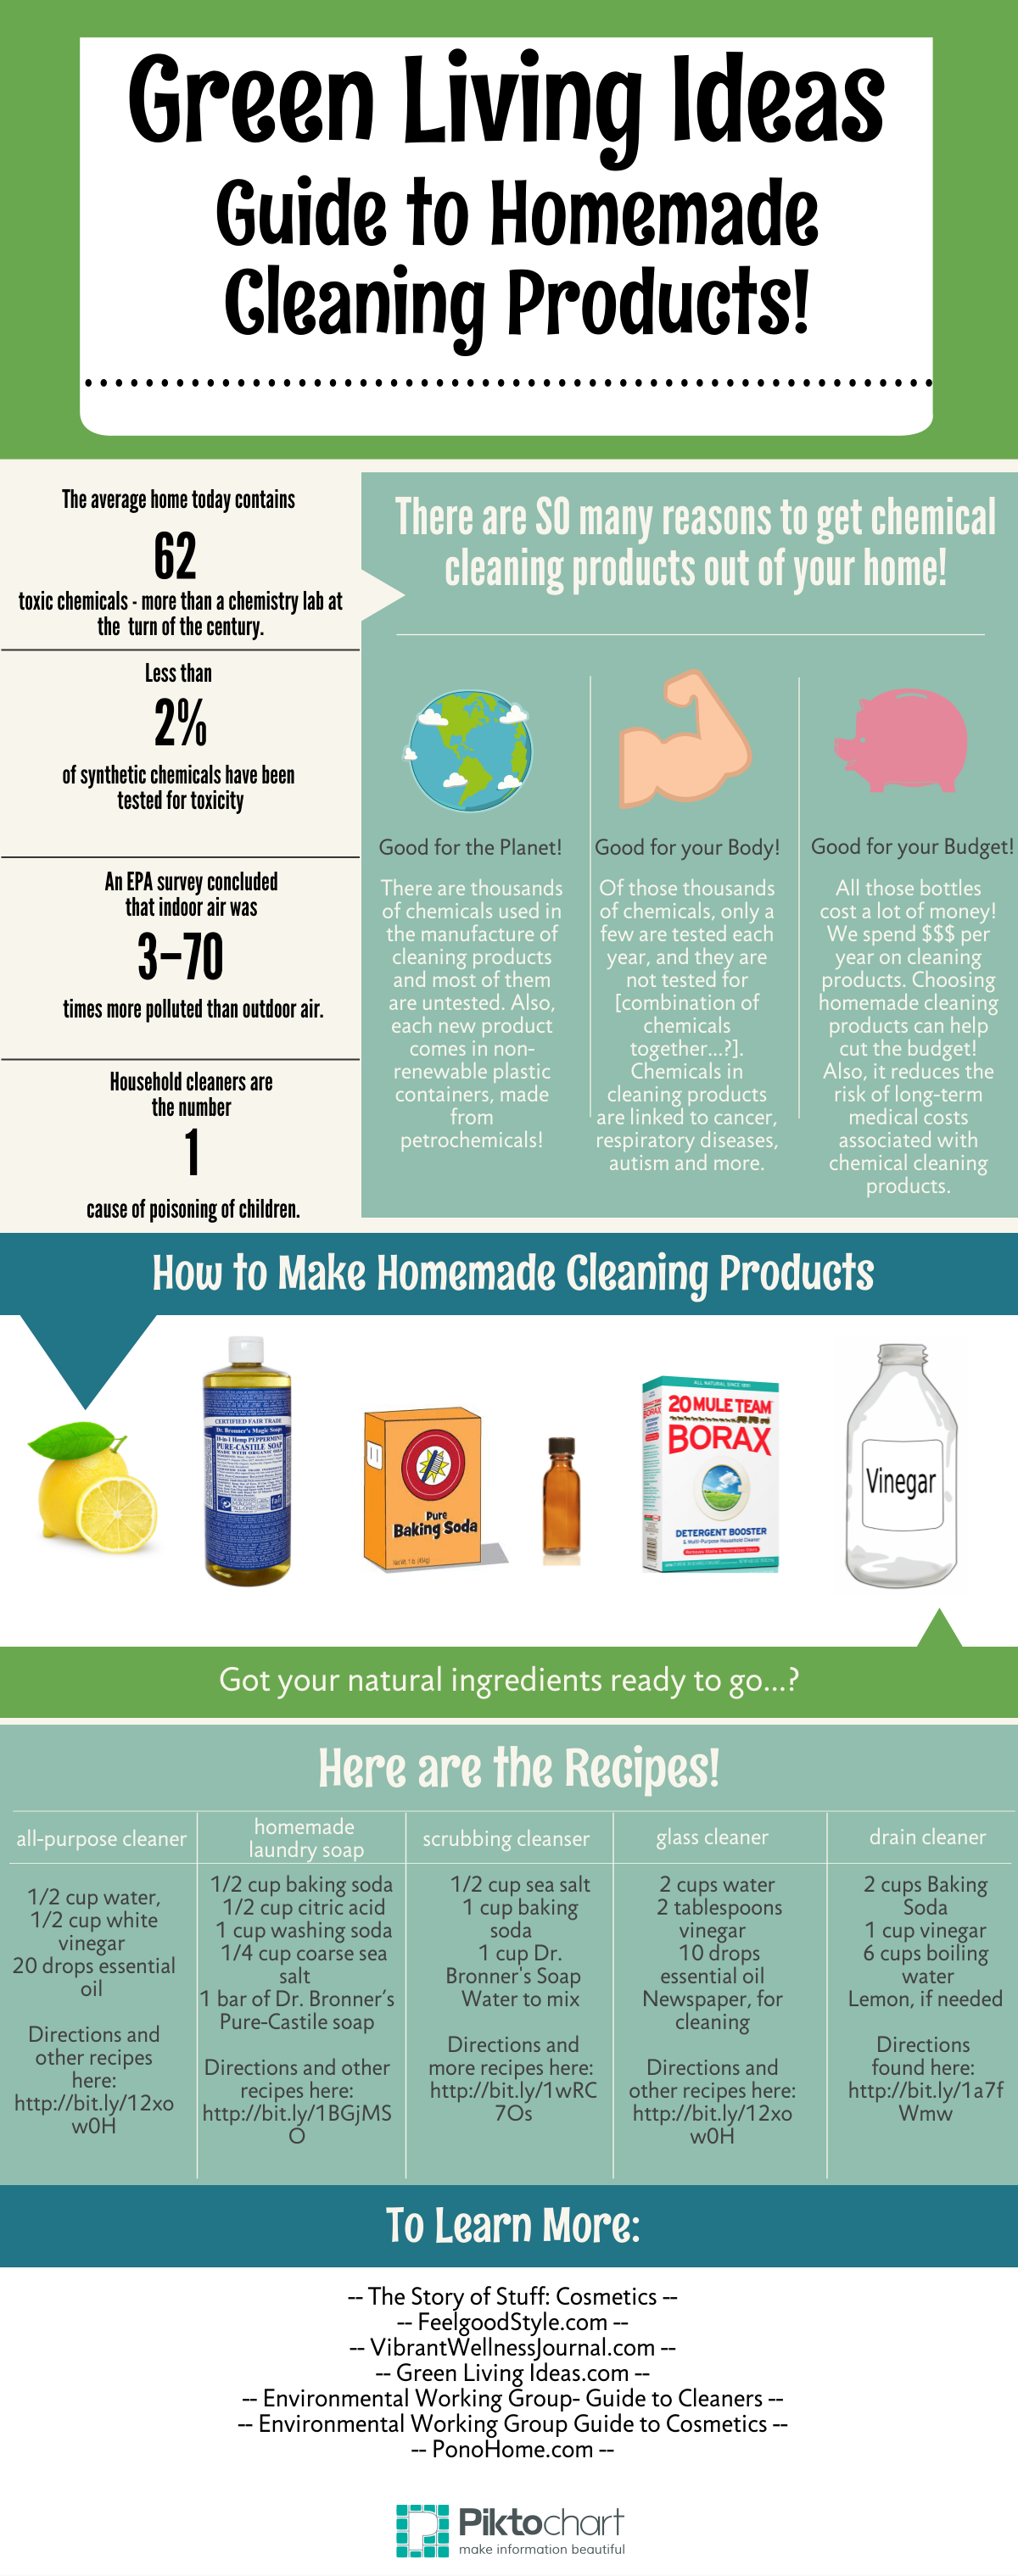 green cleaning recipes